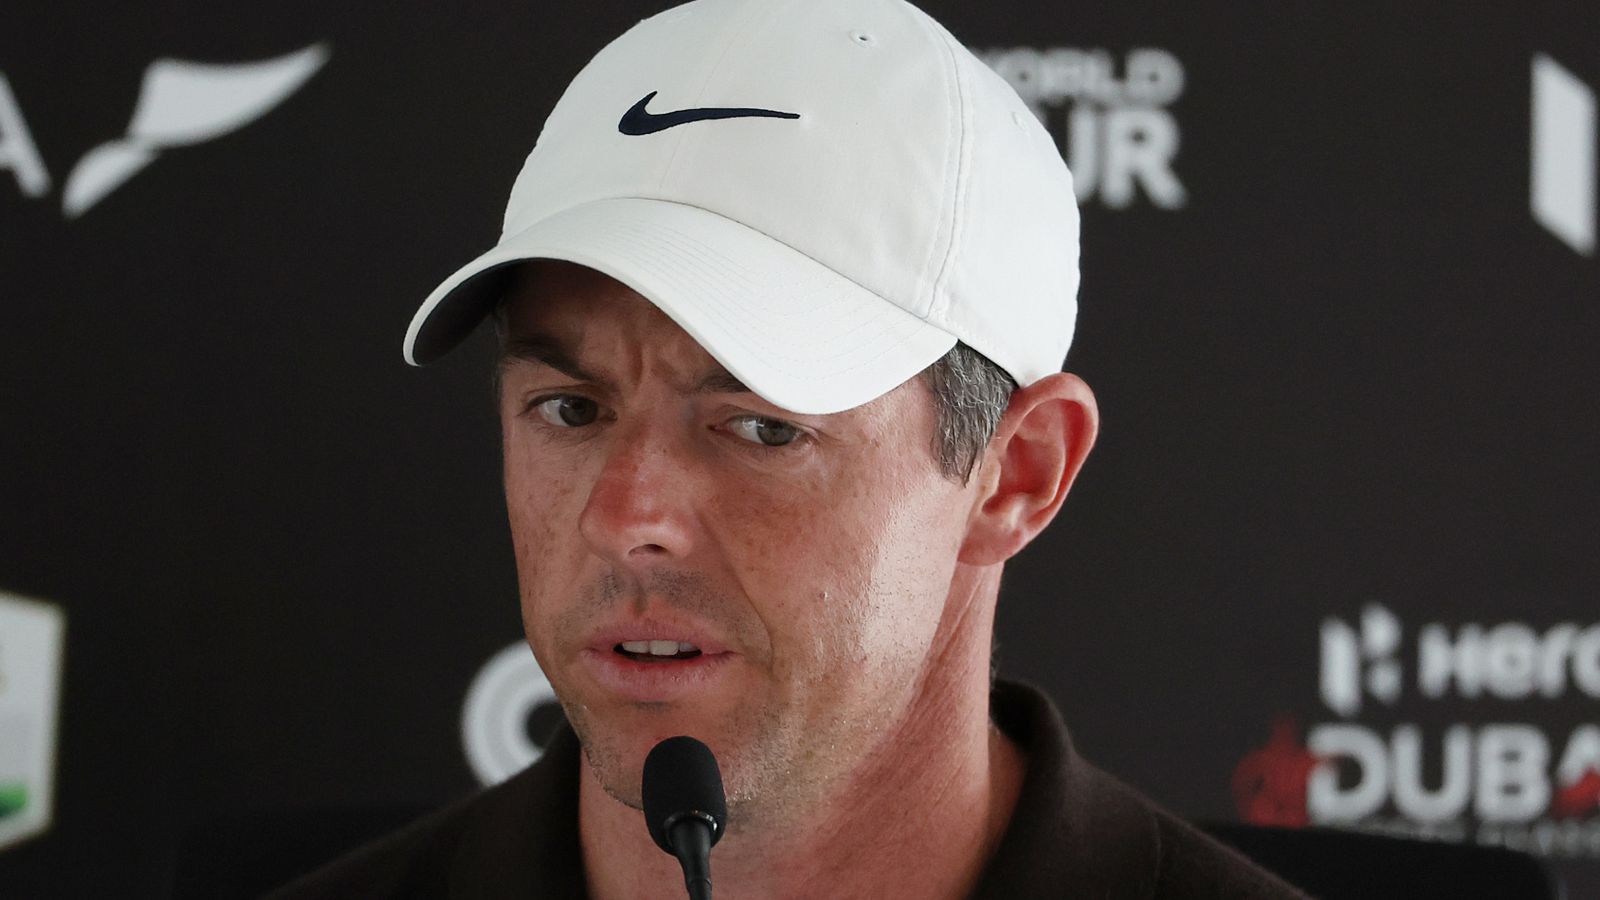 Rory McIlroy accuses Patrick Reed of ‘not living in reality’ after range incident at Dubai Desert Classic